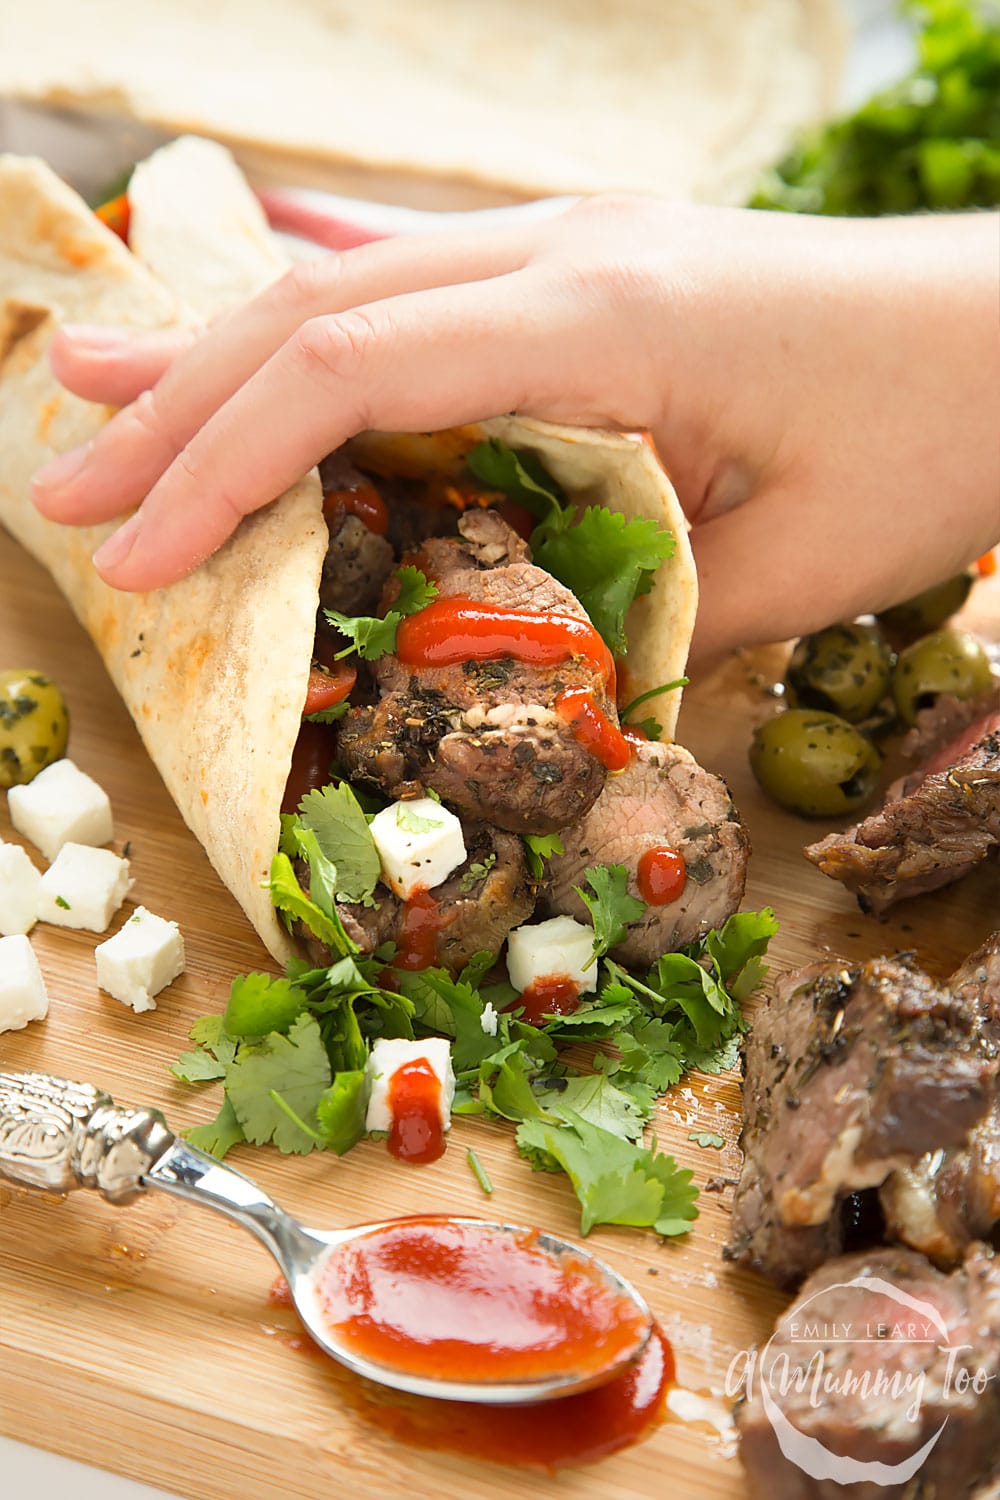 A delicious herb crusted Welsh Lamb in a quick coriander flatbread wrap, shown ready to eat